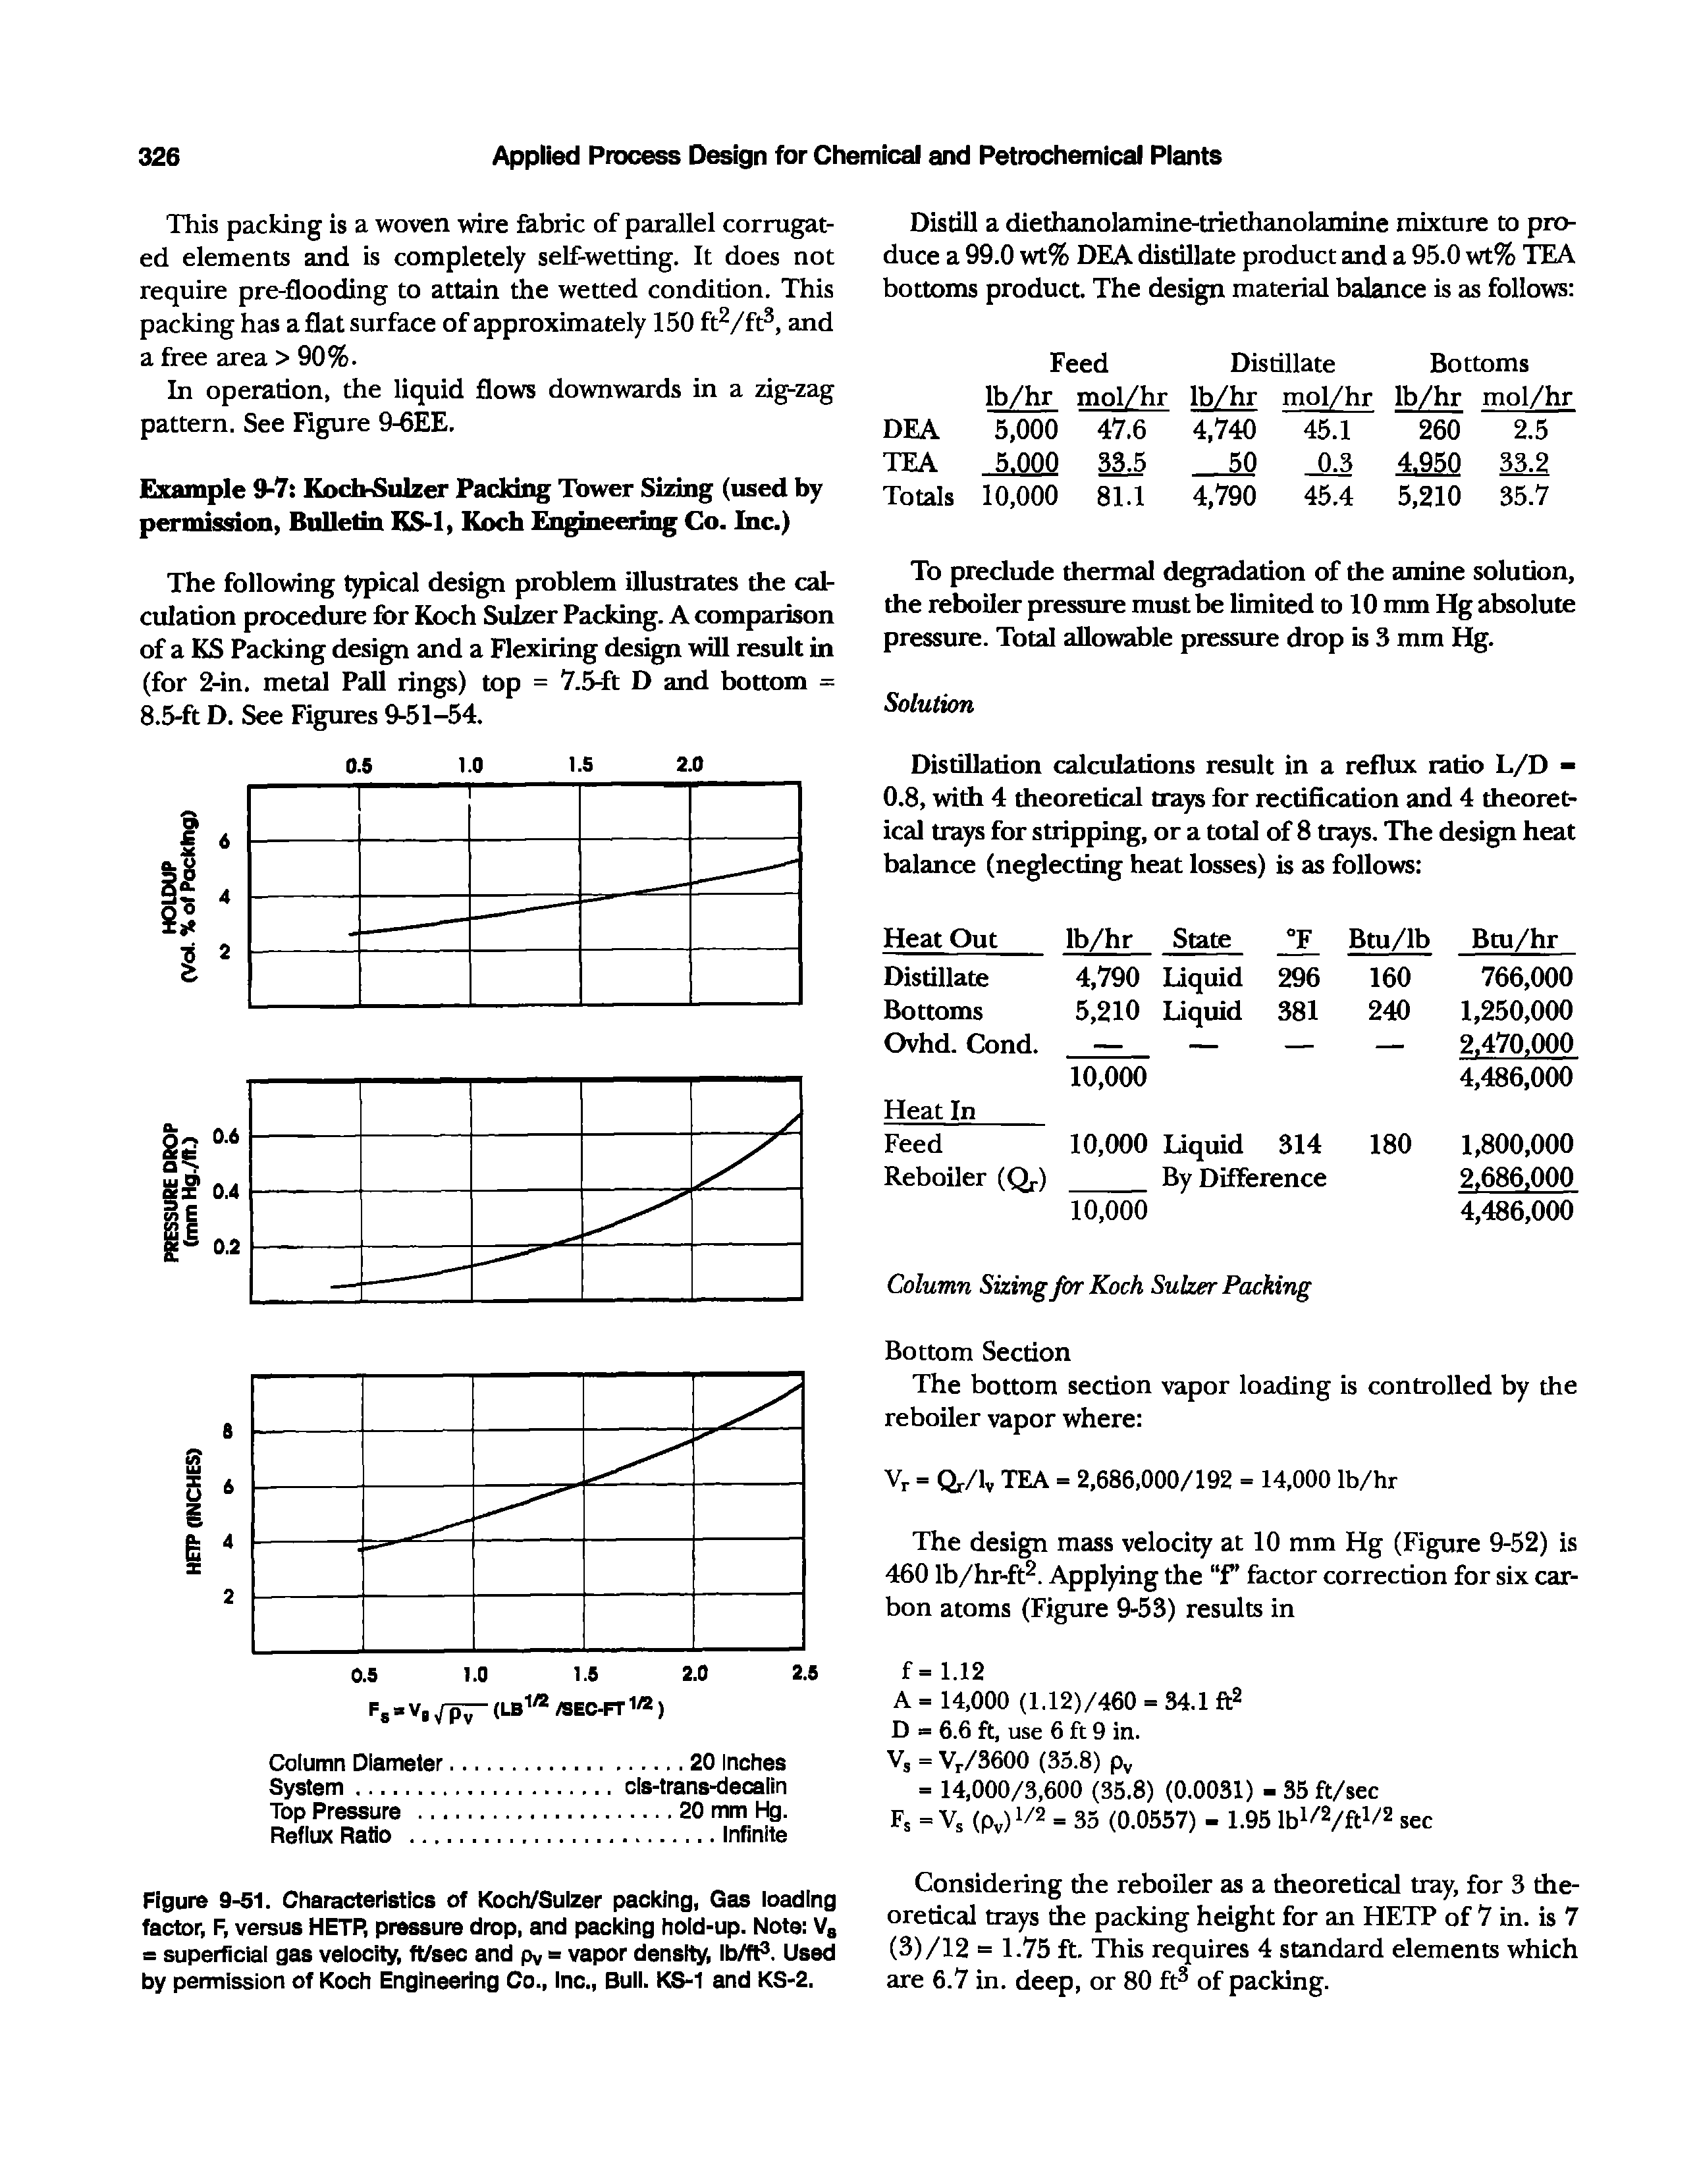 Figure 9-51. Characteristics of Koch/Sulzer packing, Gas loading factor, F, versus HETP, pressure drop, and packing hold-up. Note Vs = superficial gas velocity, ft/sec and pv = vapor density, Ib/ft. Used by permission of Koch Engineering Co., inc., Buii. KS-1 and KS-2.